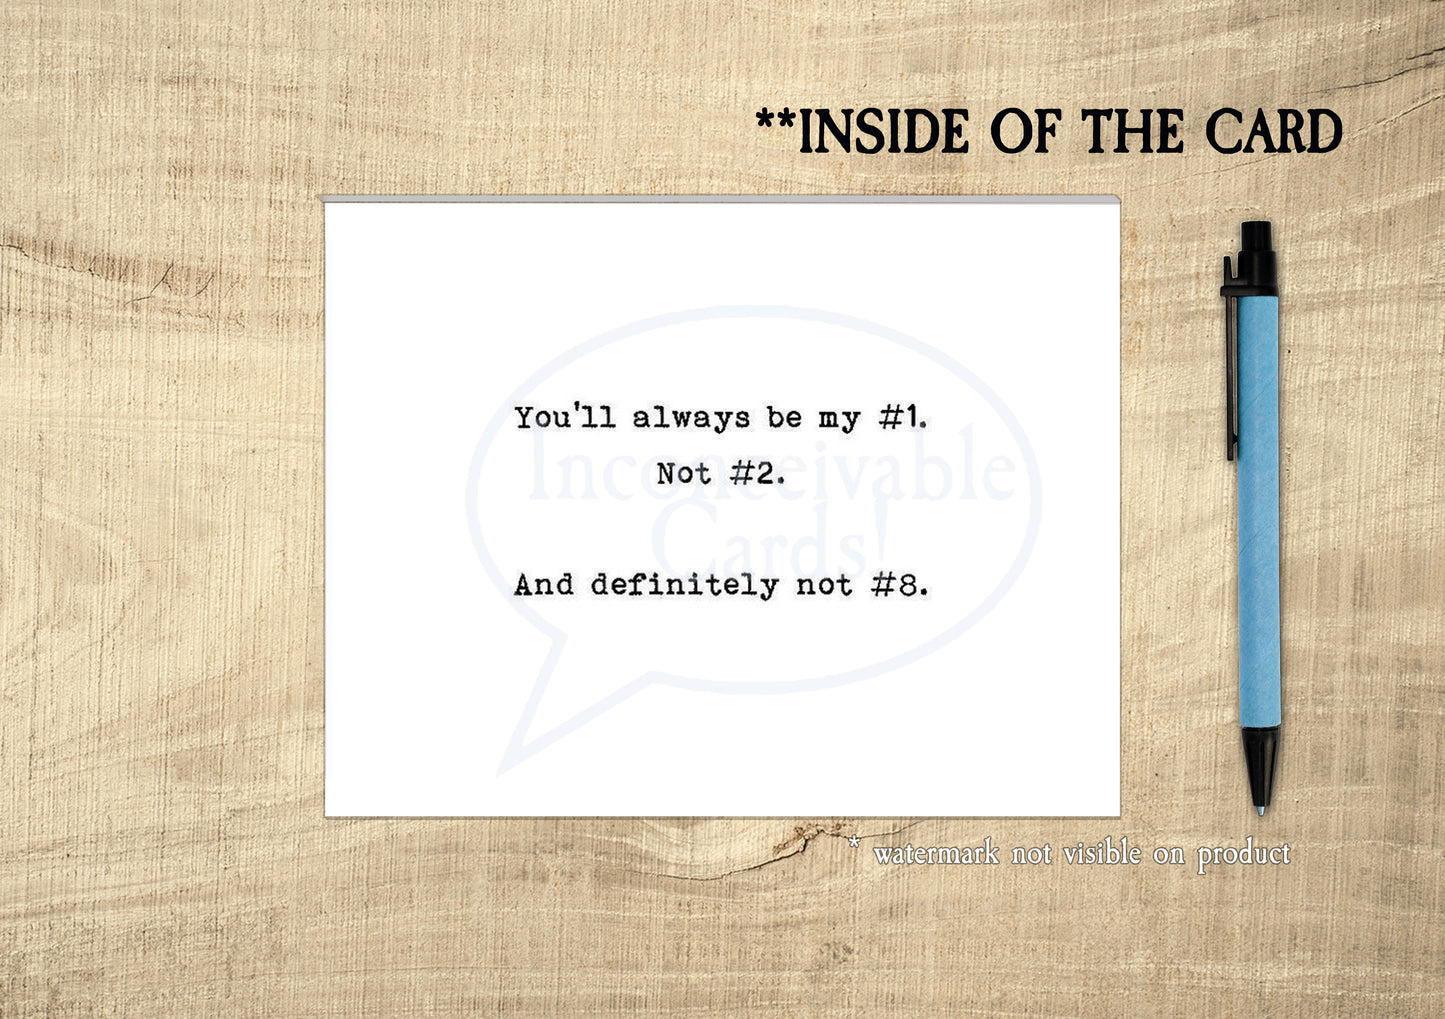 The Office - "You're My #1 - Not China" Card for Best Friend, Romantic Card, Anniversary Card, Valentines day Card